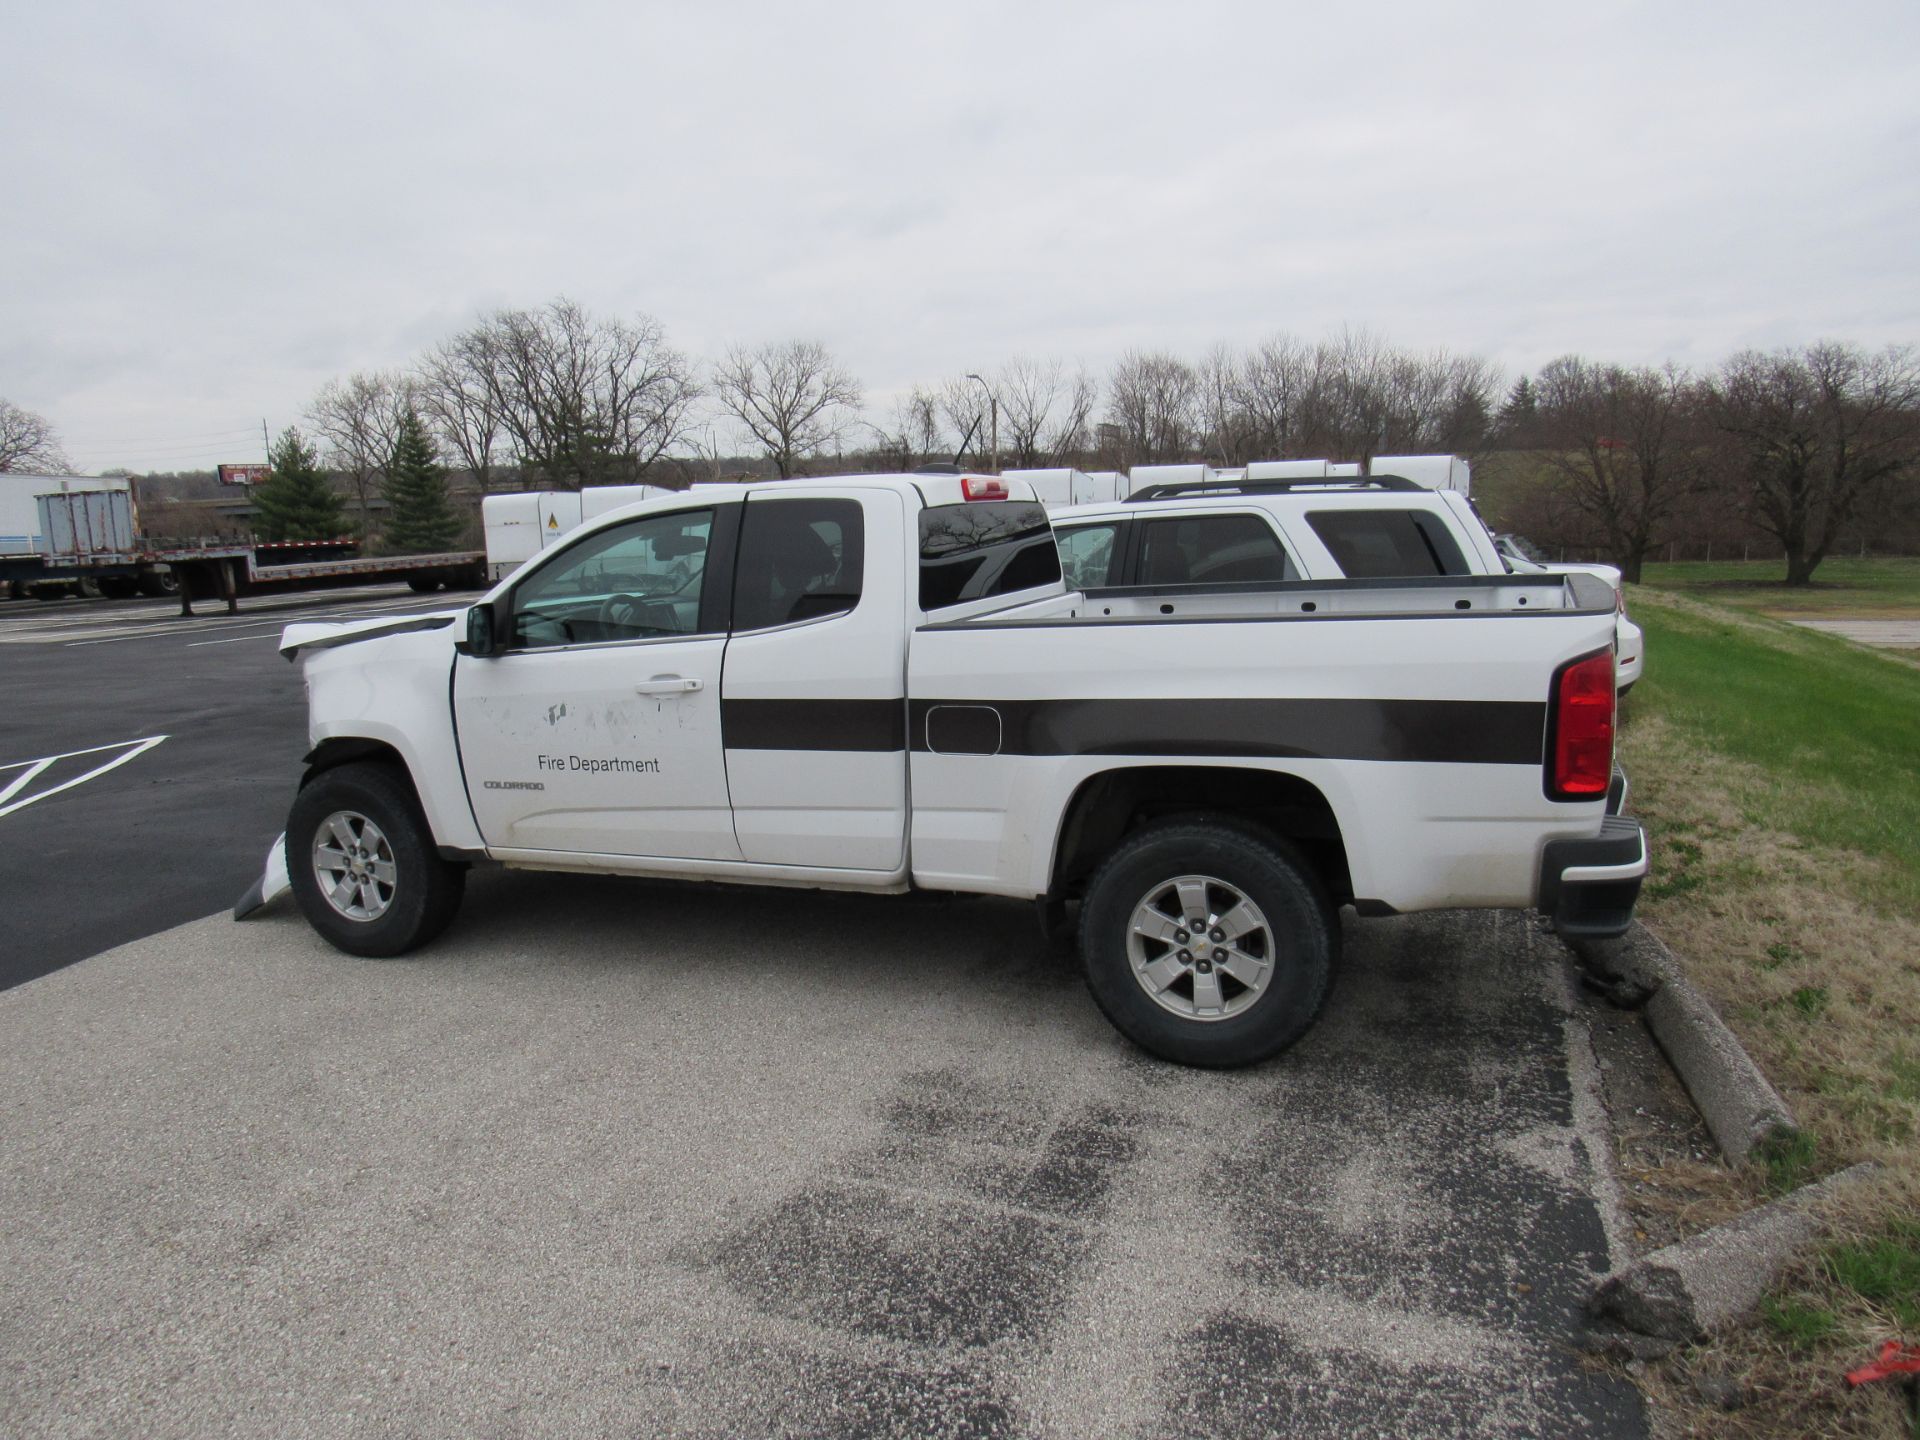 2015 Chevrolet Colorado Pickup Truck (Needs work, recently involved in a collision) - Image 3 of 11